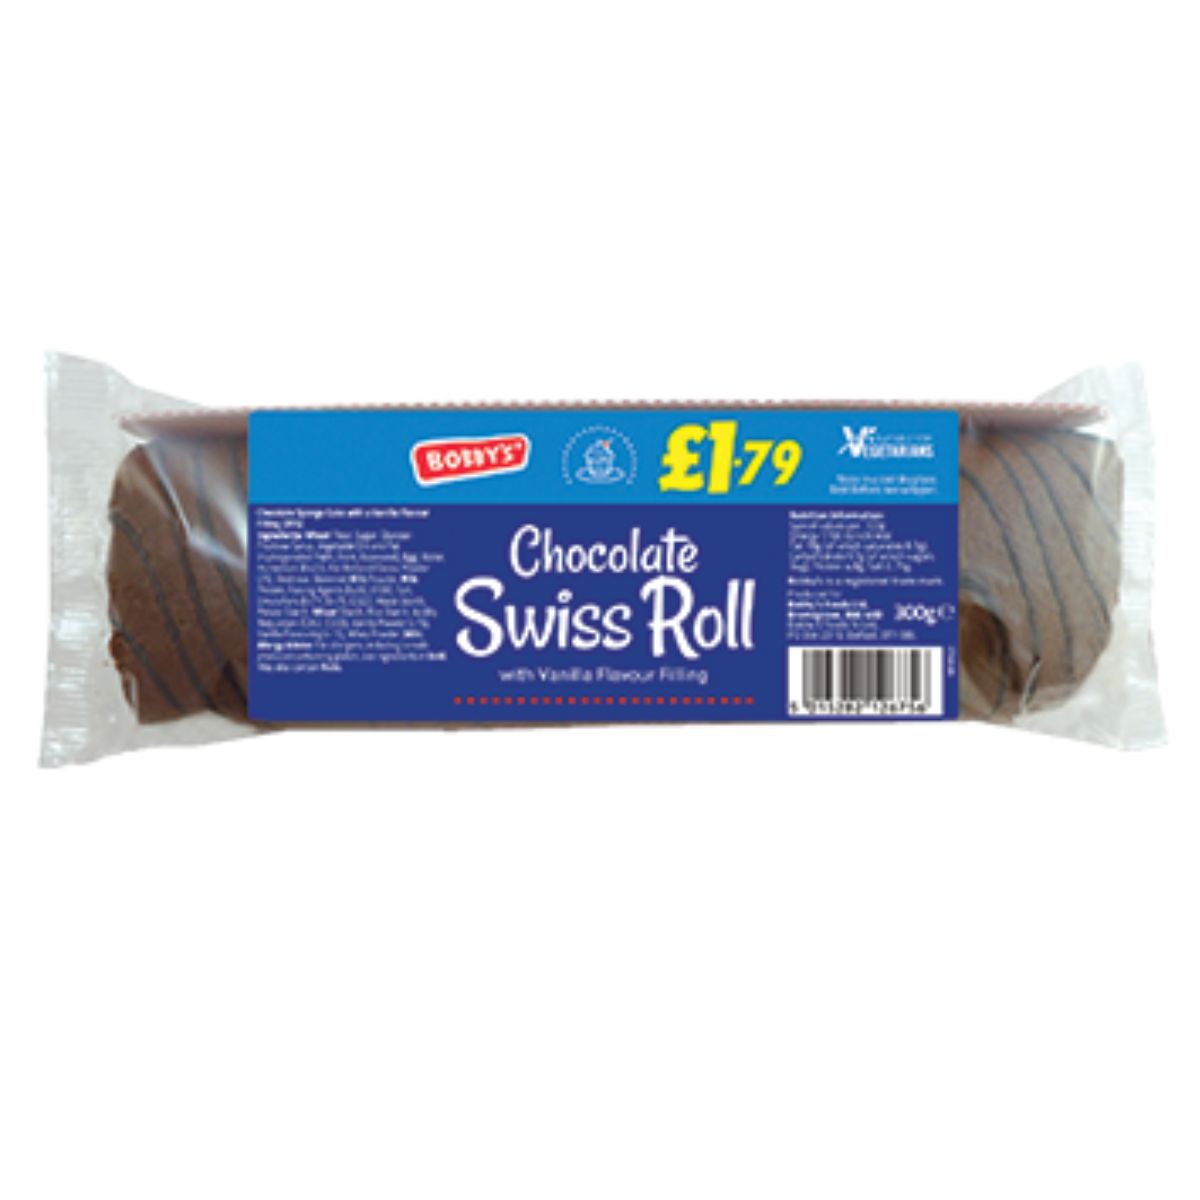 A package of Bobbys - Chocolate Swiss Roll - 300g.